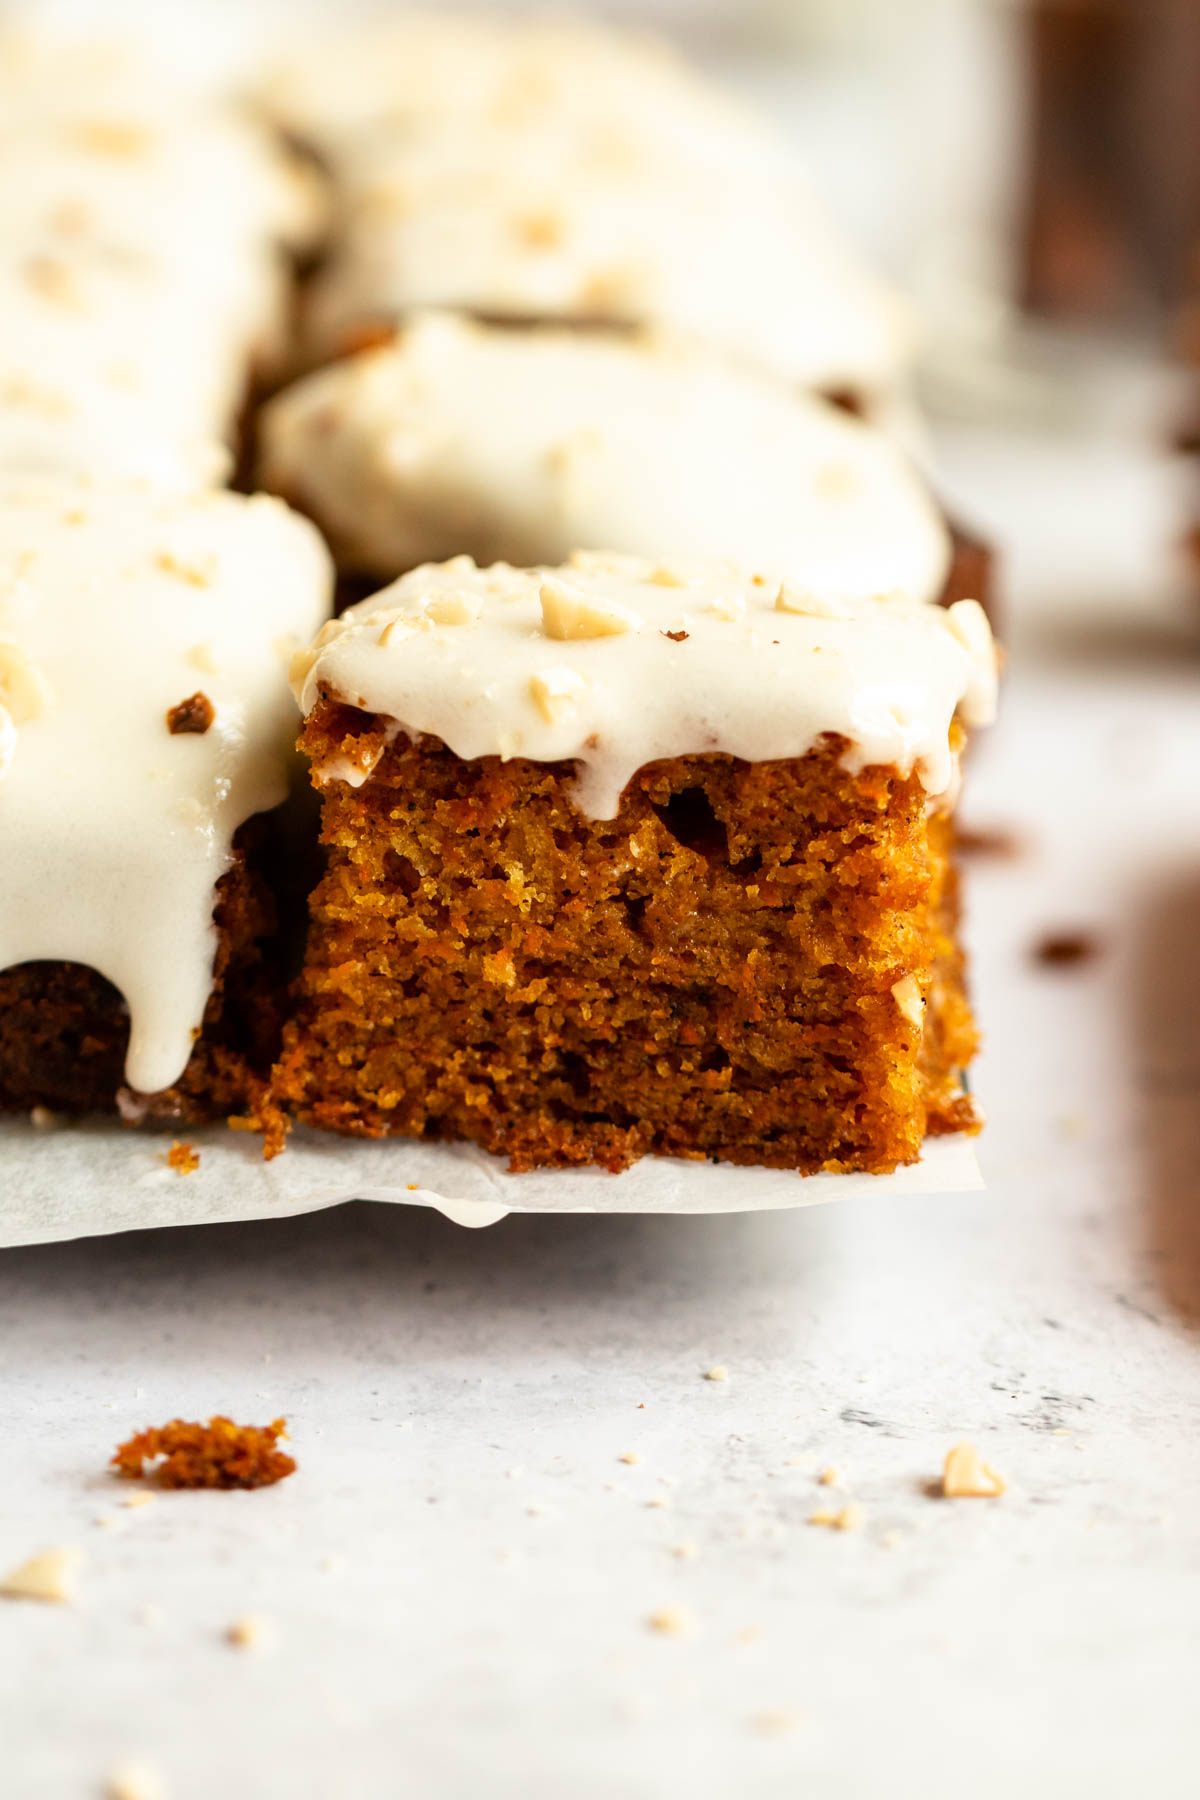 Sliced easy carrot cake on a parchment paper.